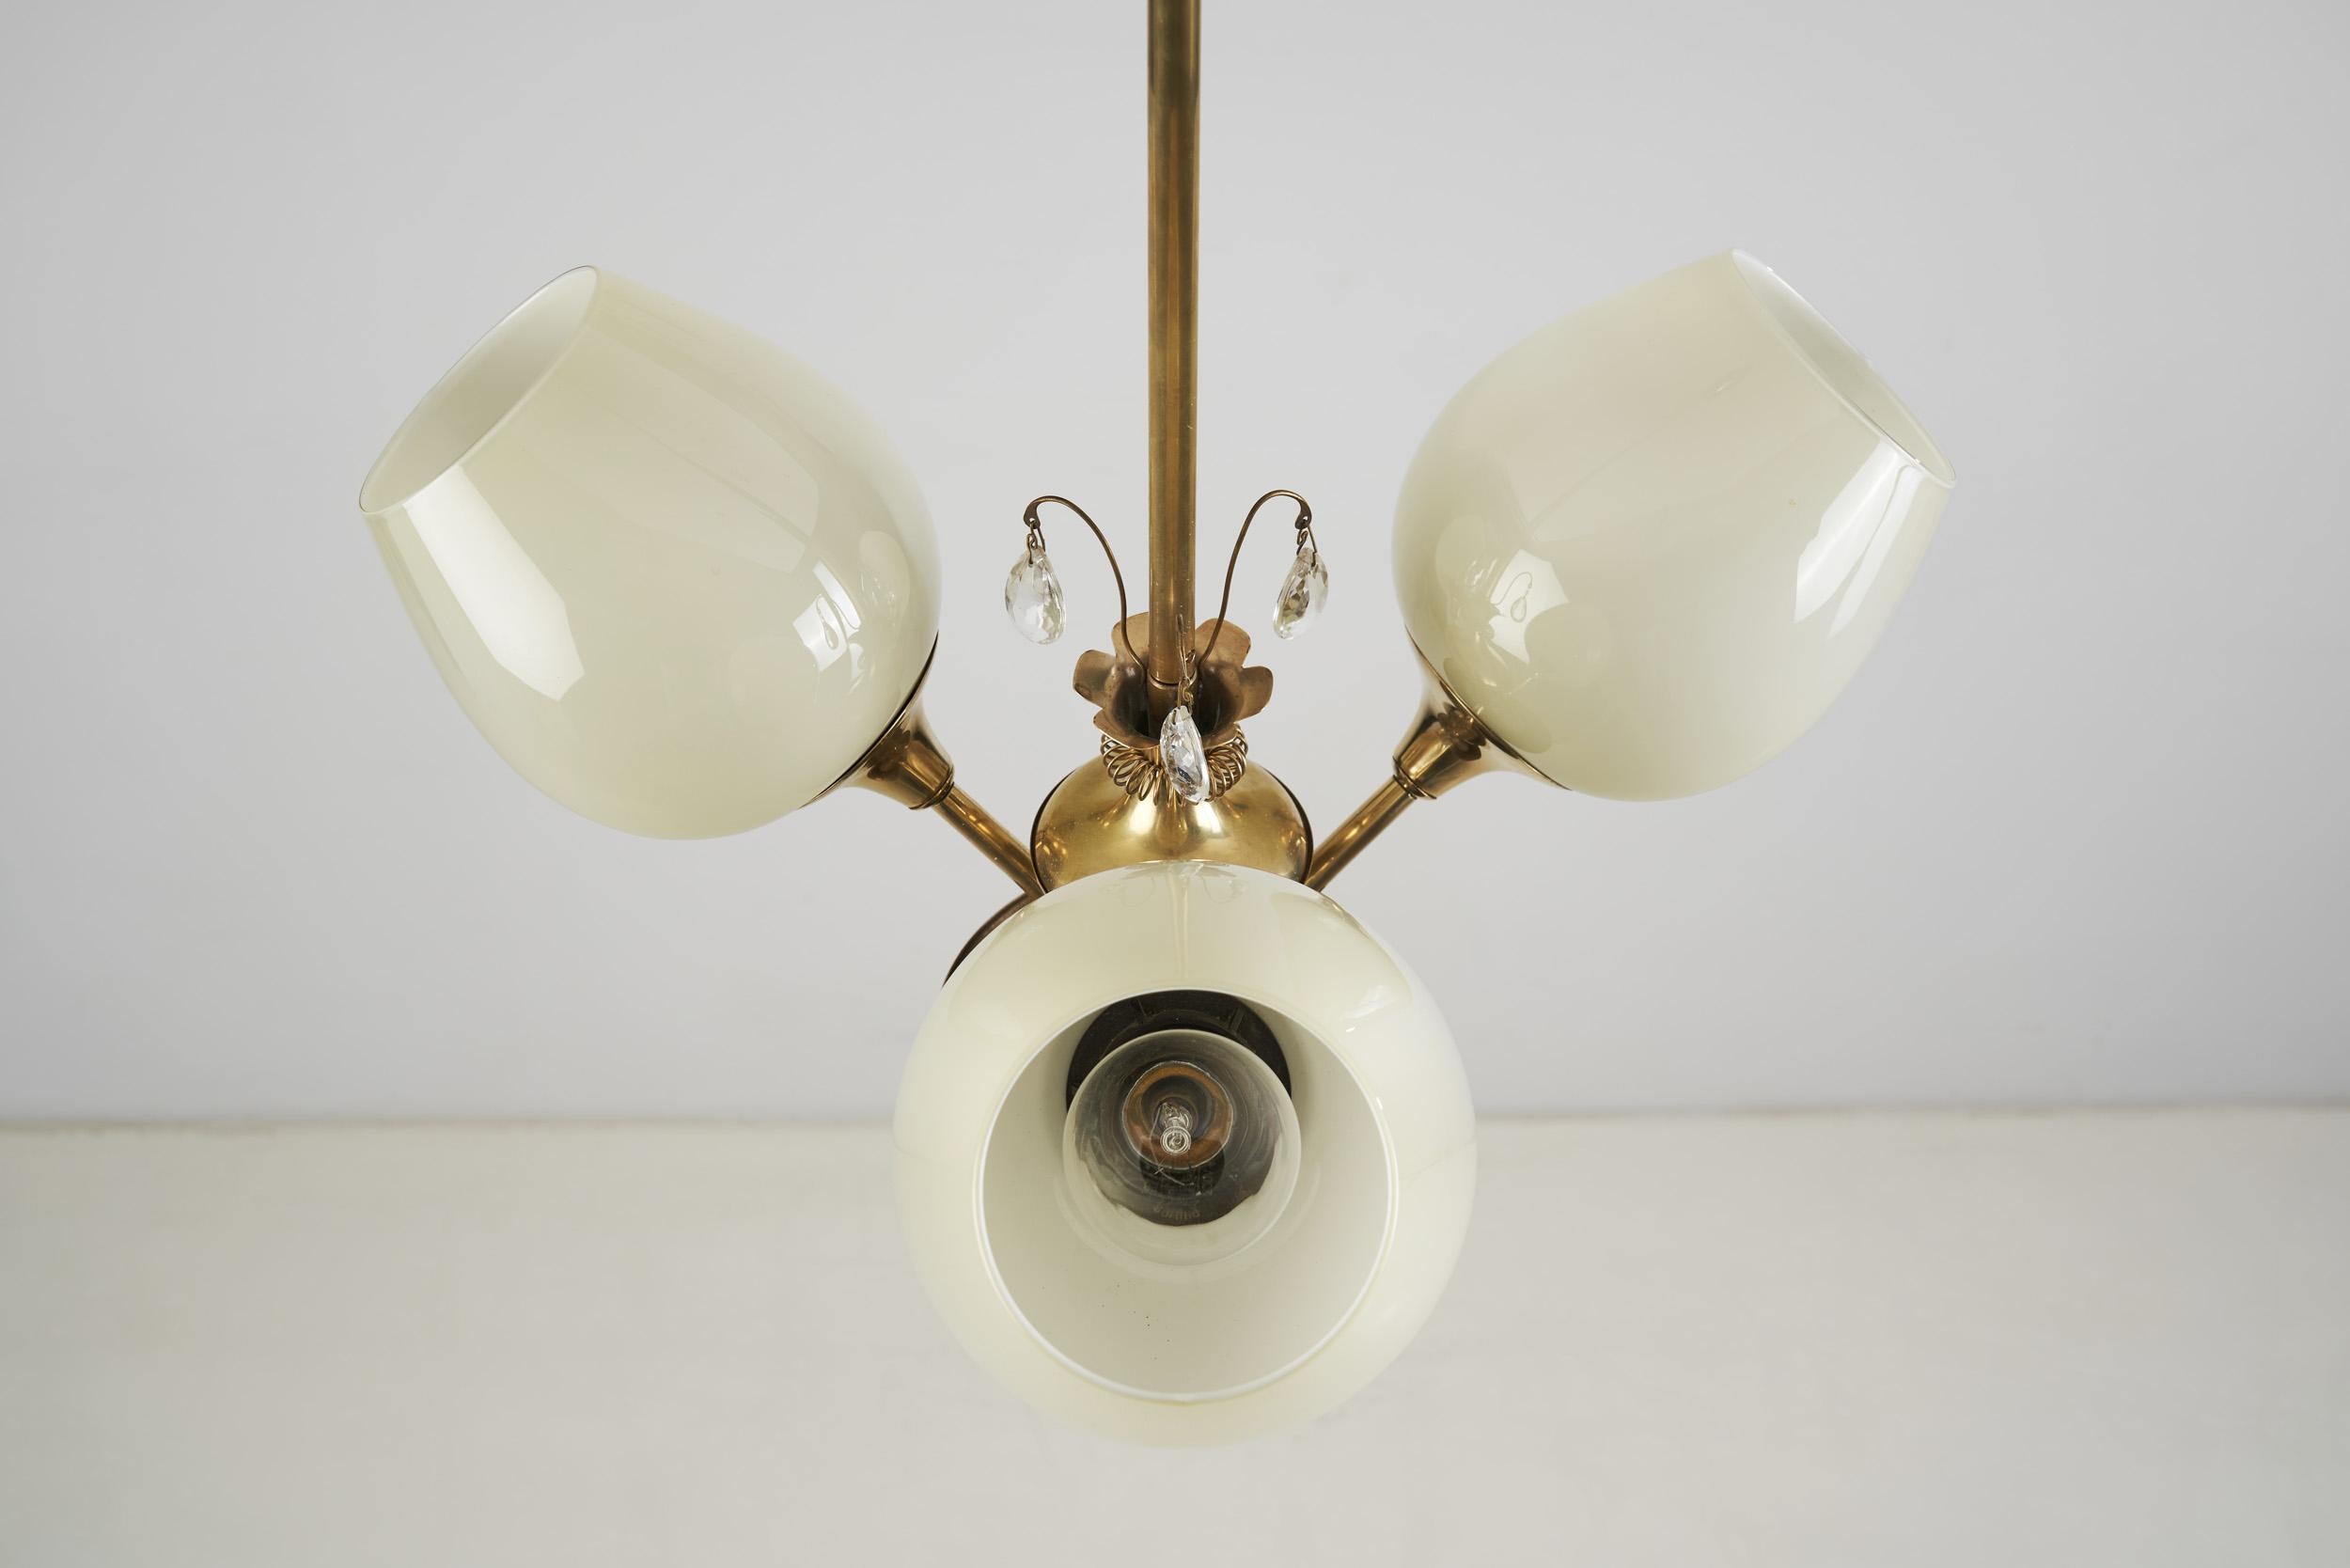 Brass Ceiling Lamp with Opal Shades by Itsu 'Attr.', Finland, ca 1950s For Sale 7